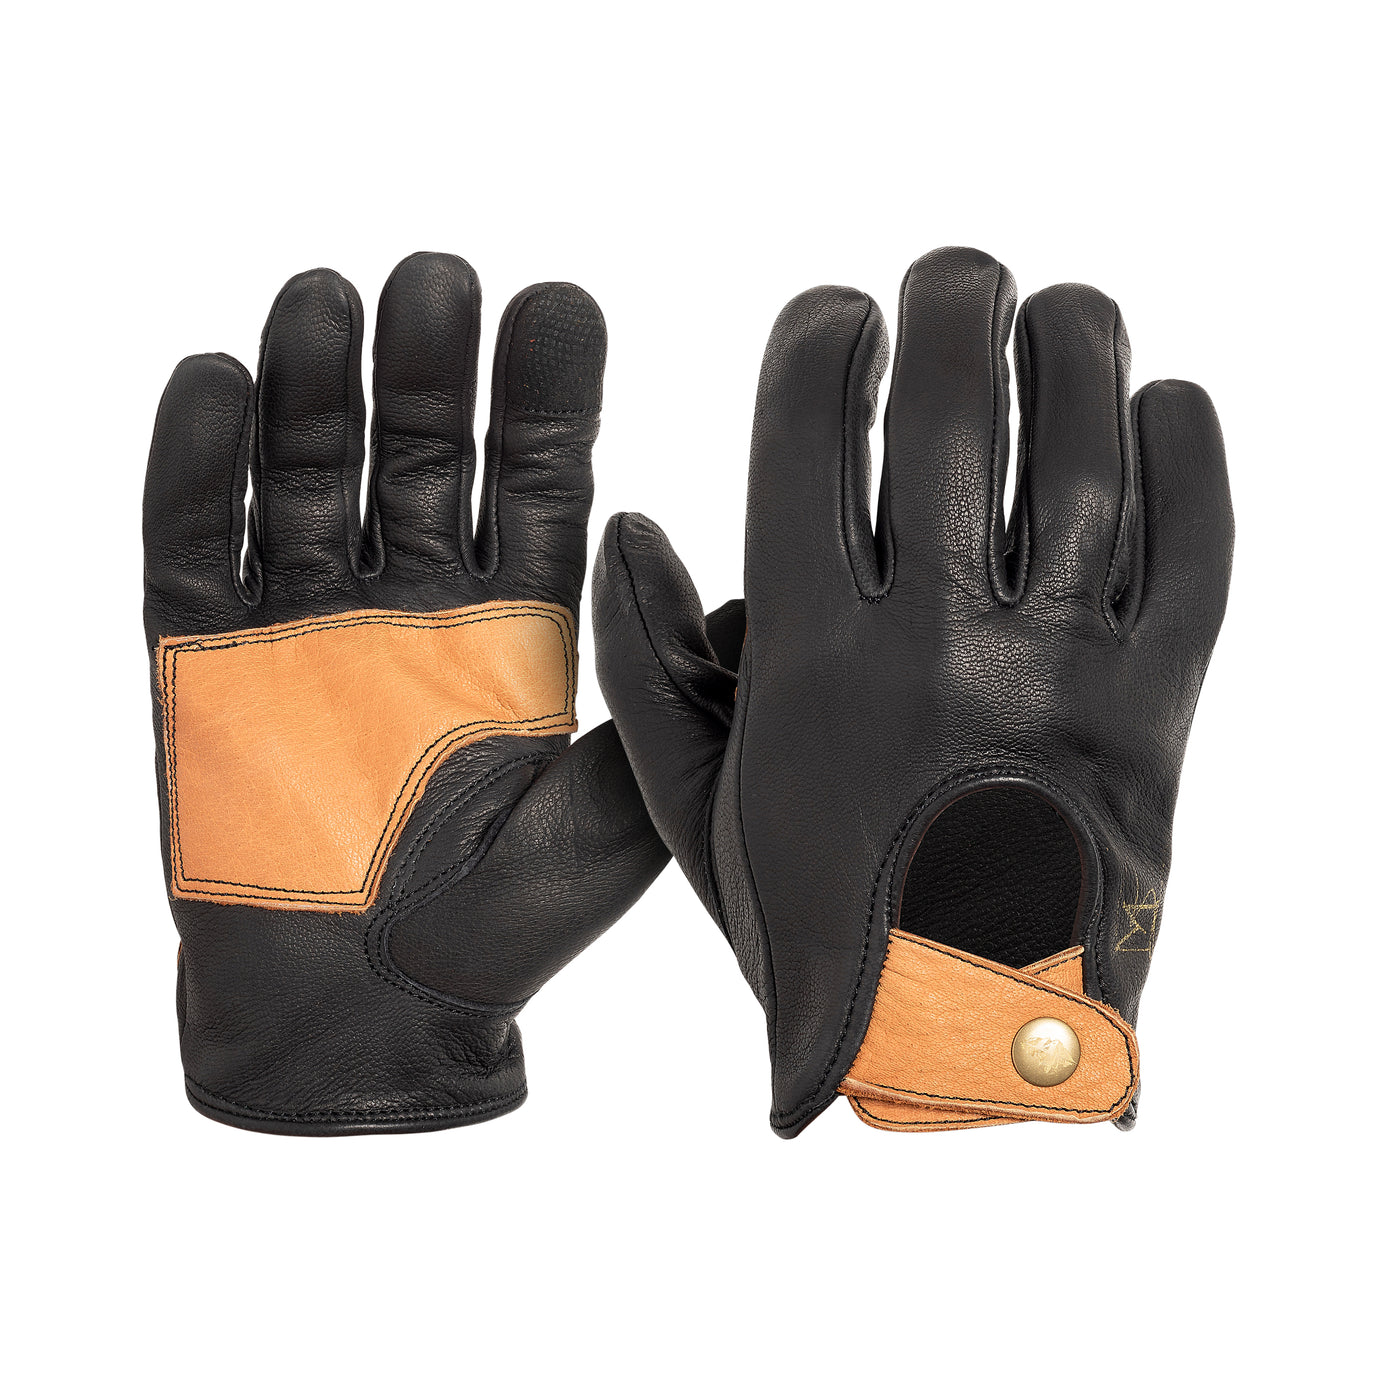 Dipped Leather Deer Glove: Lion Guard Driving Glove: Black/Brown